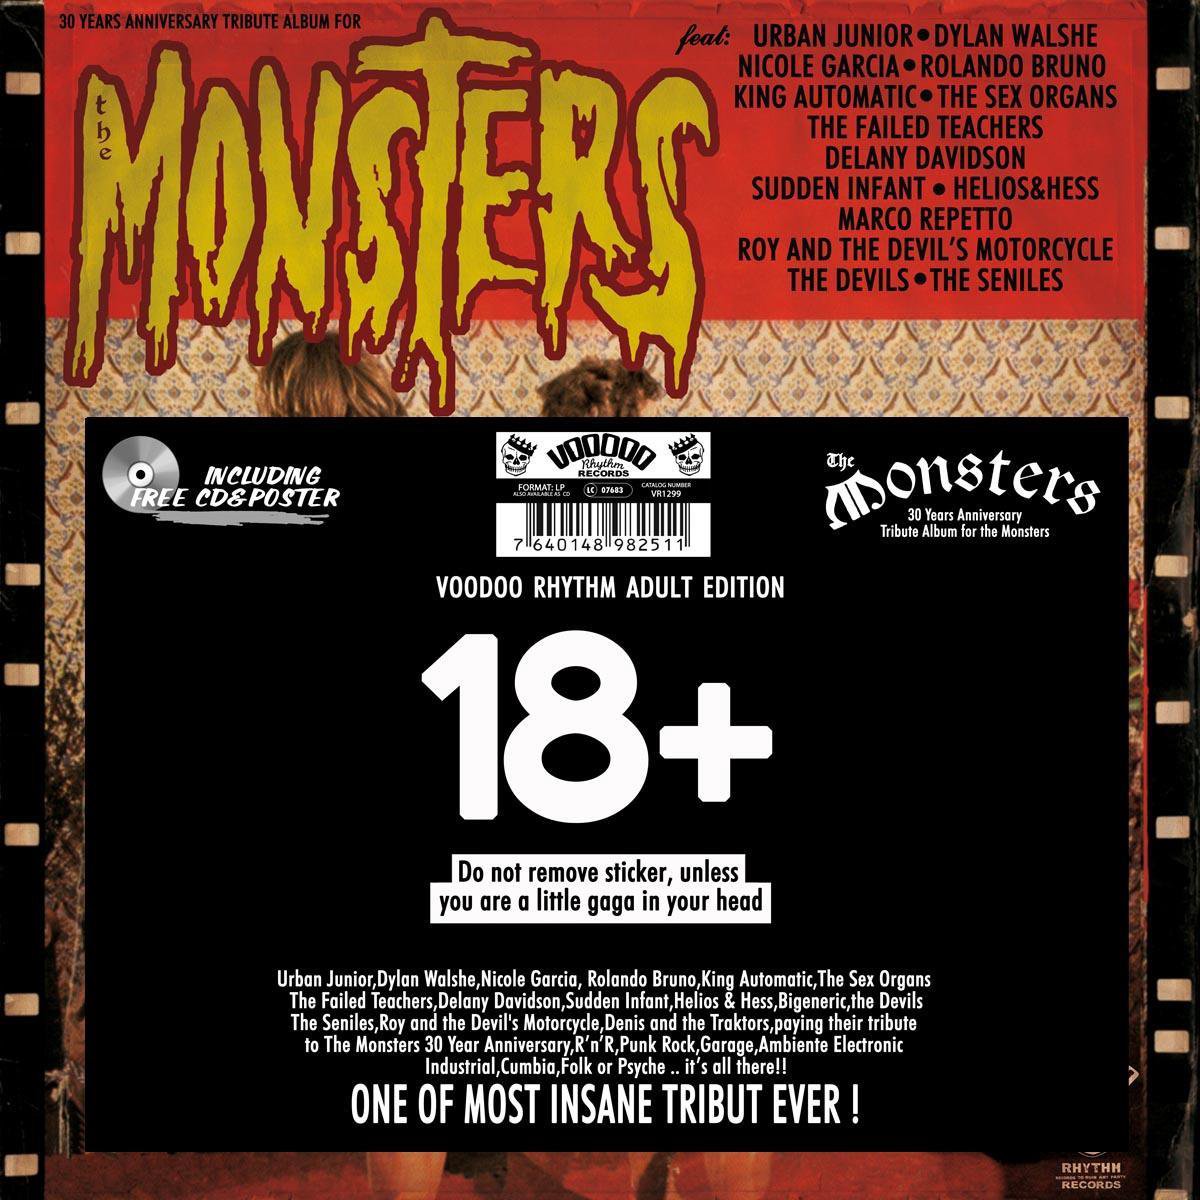 30 Years Anniversary Tribute Album for the Monsters - various artists